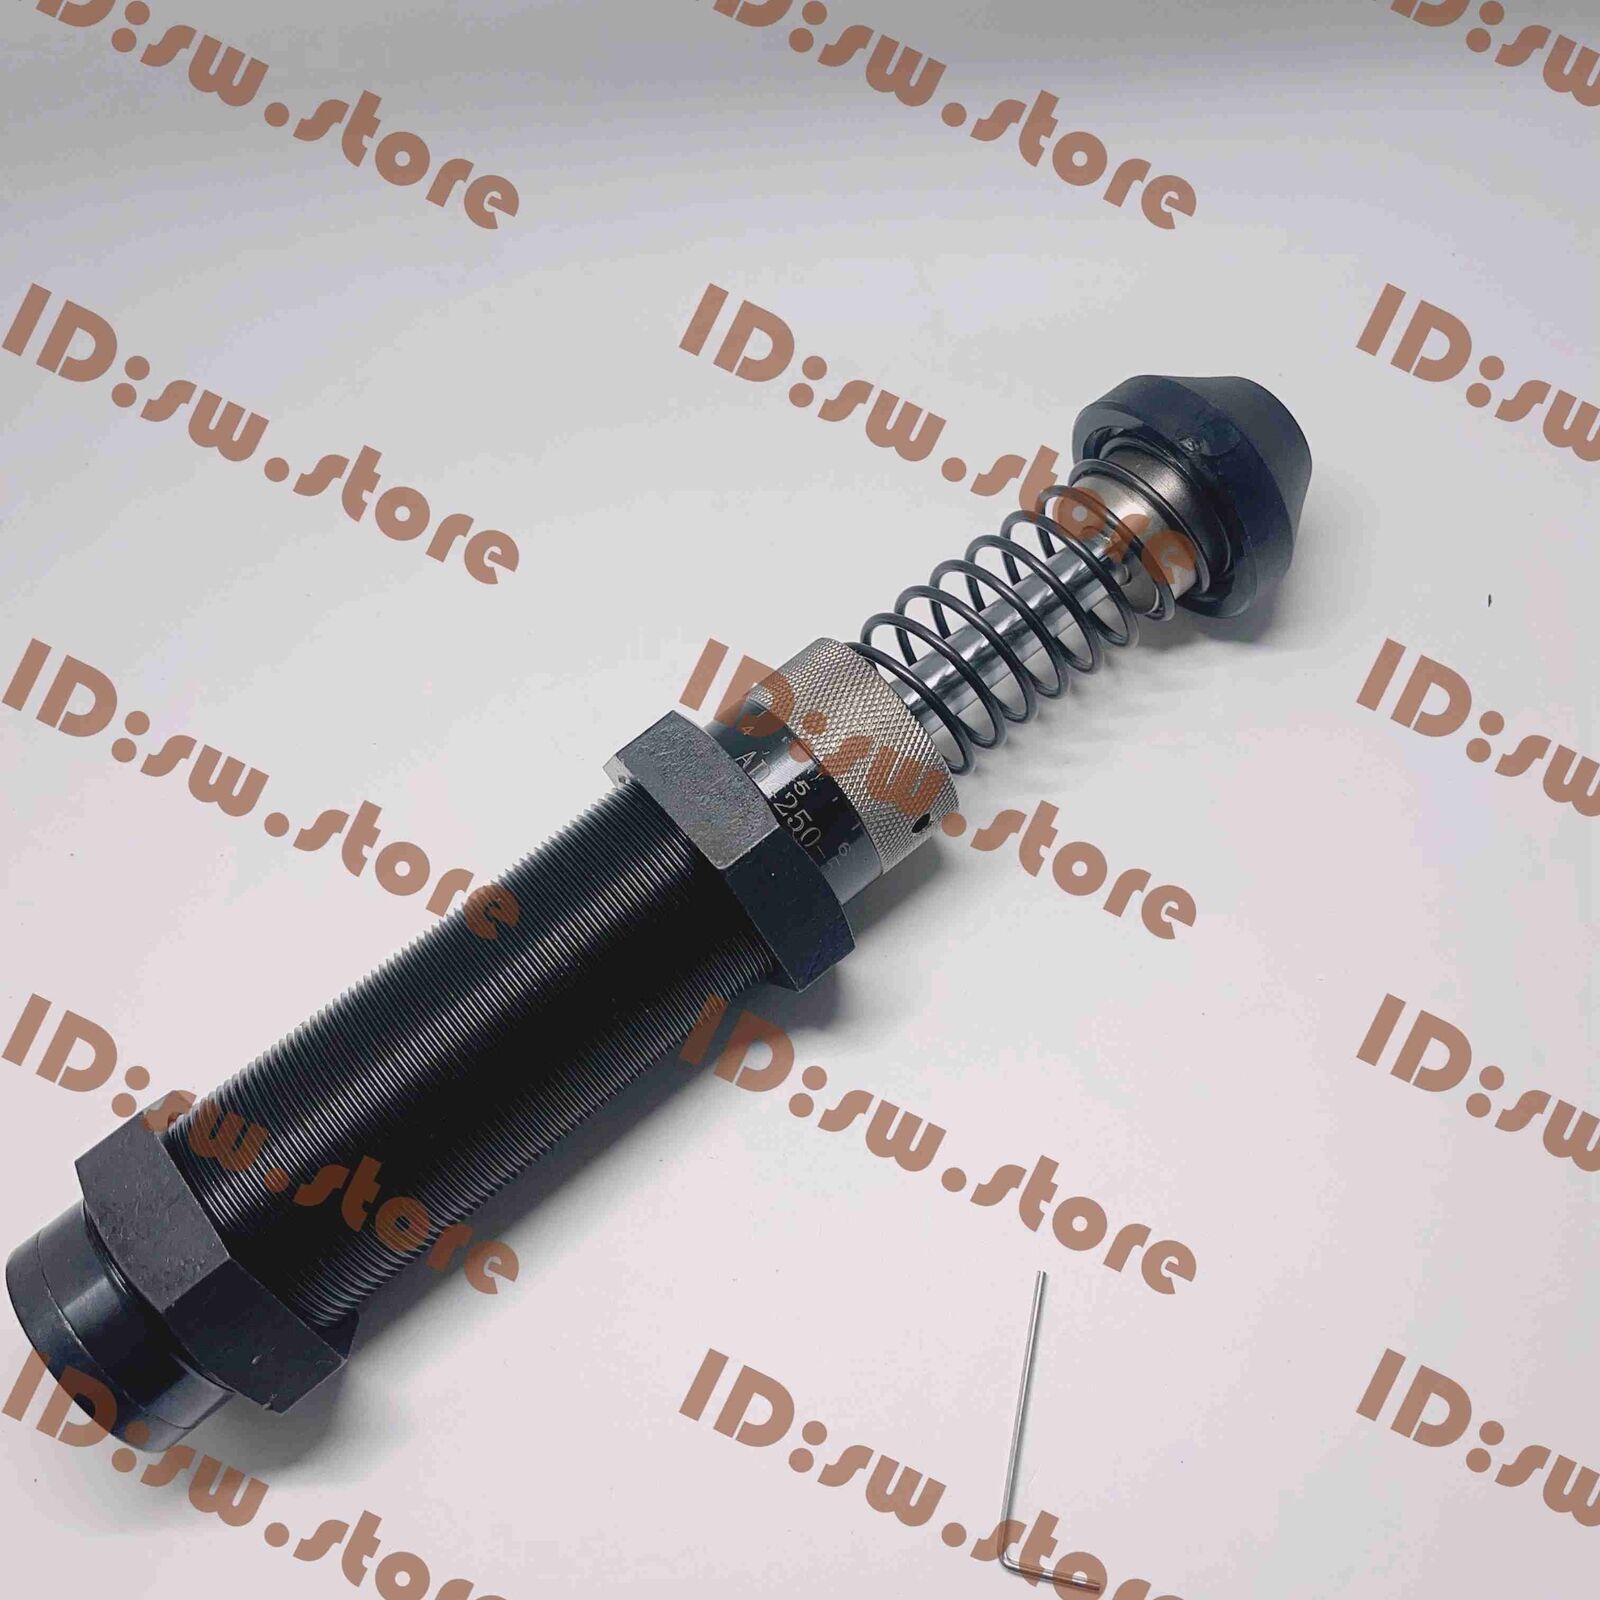 Qty:1pc Adjustable Hydraulic Shock Absorber IN BOX AD4250-5